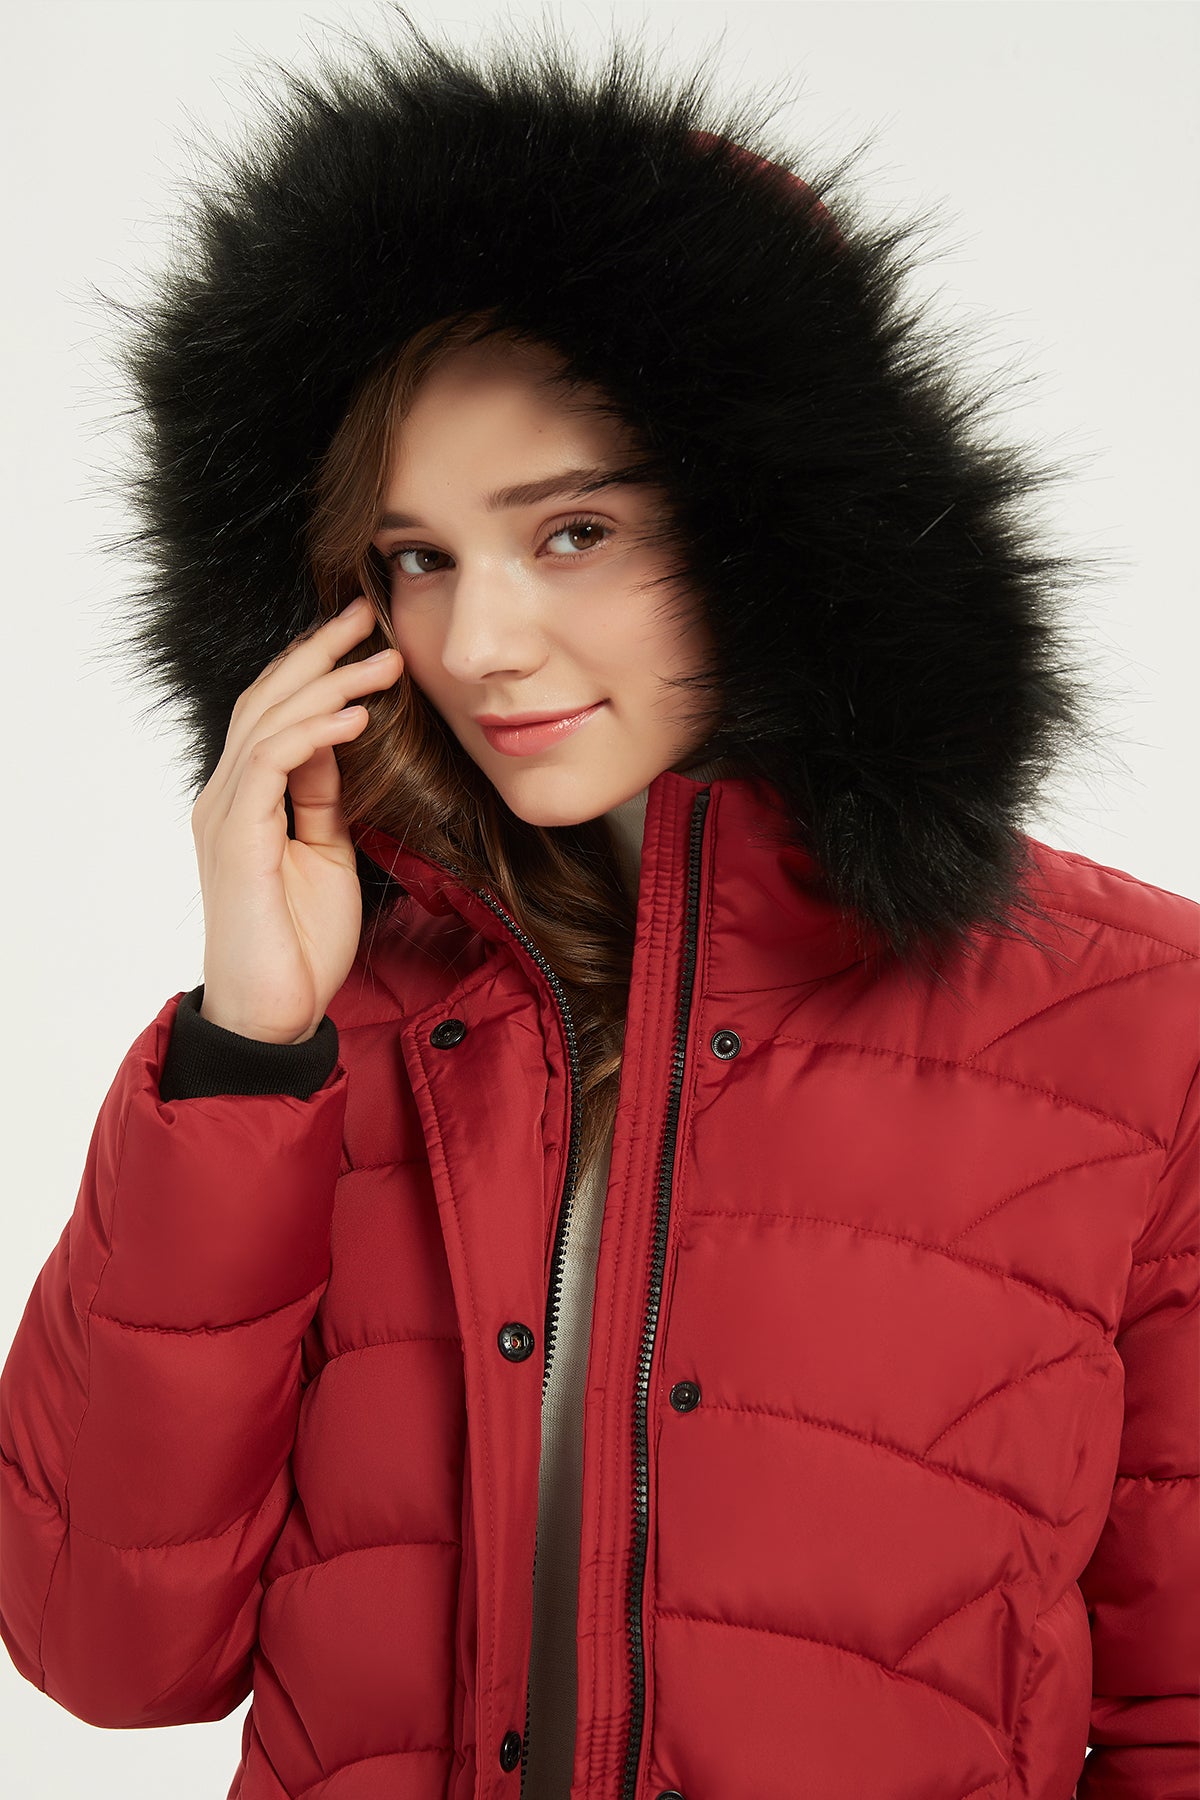 YHIWU Winter Jacket for Women Quilted Jacket with Fur Hood Puffer